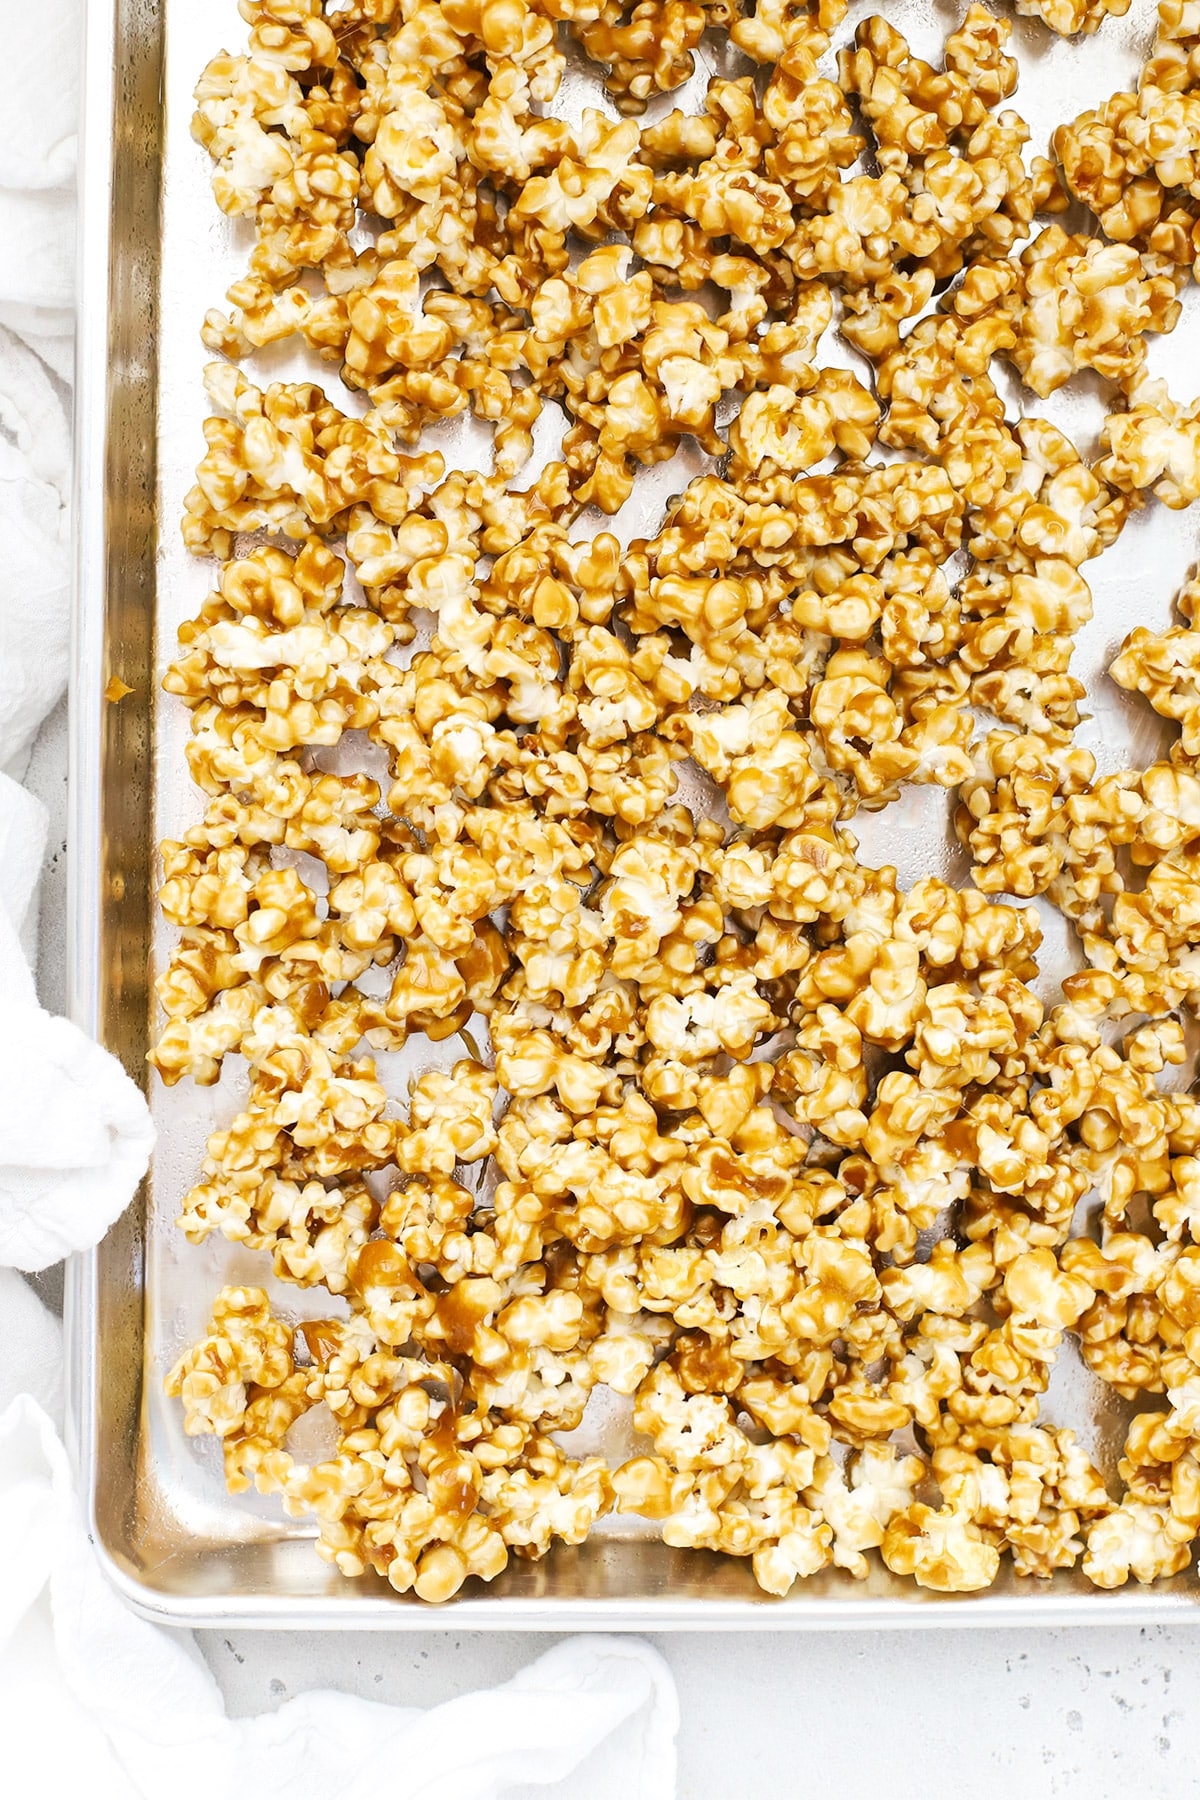 Overhead view of a sheet pan of caramel popcorn before it goes into the oven